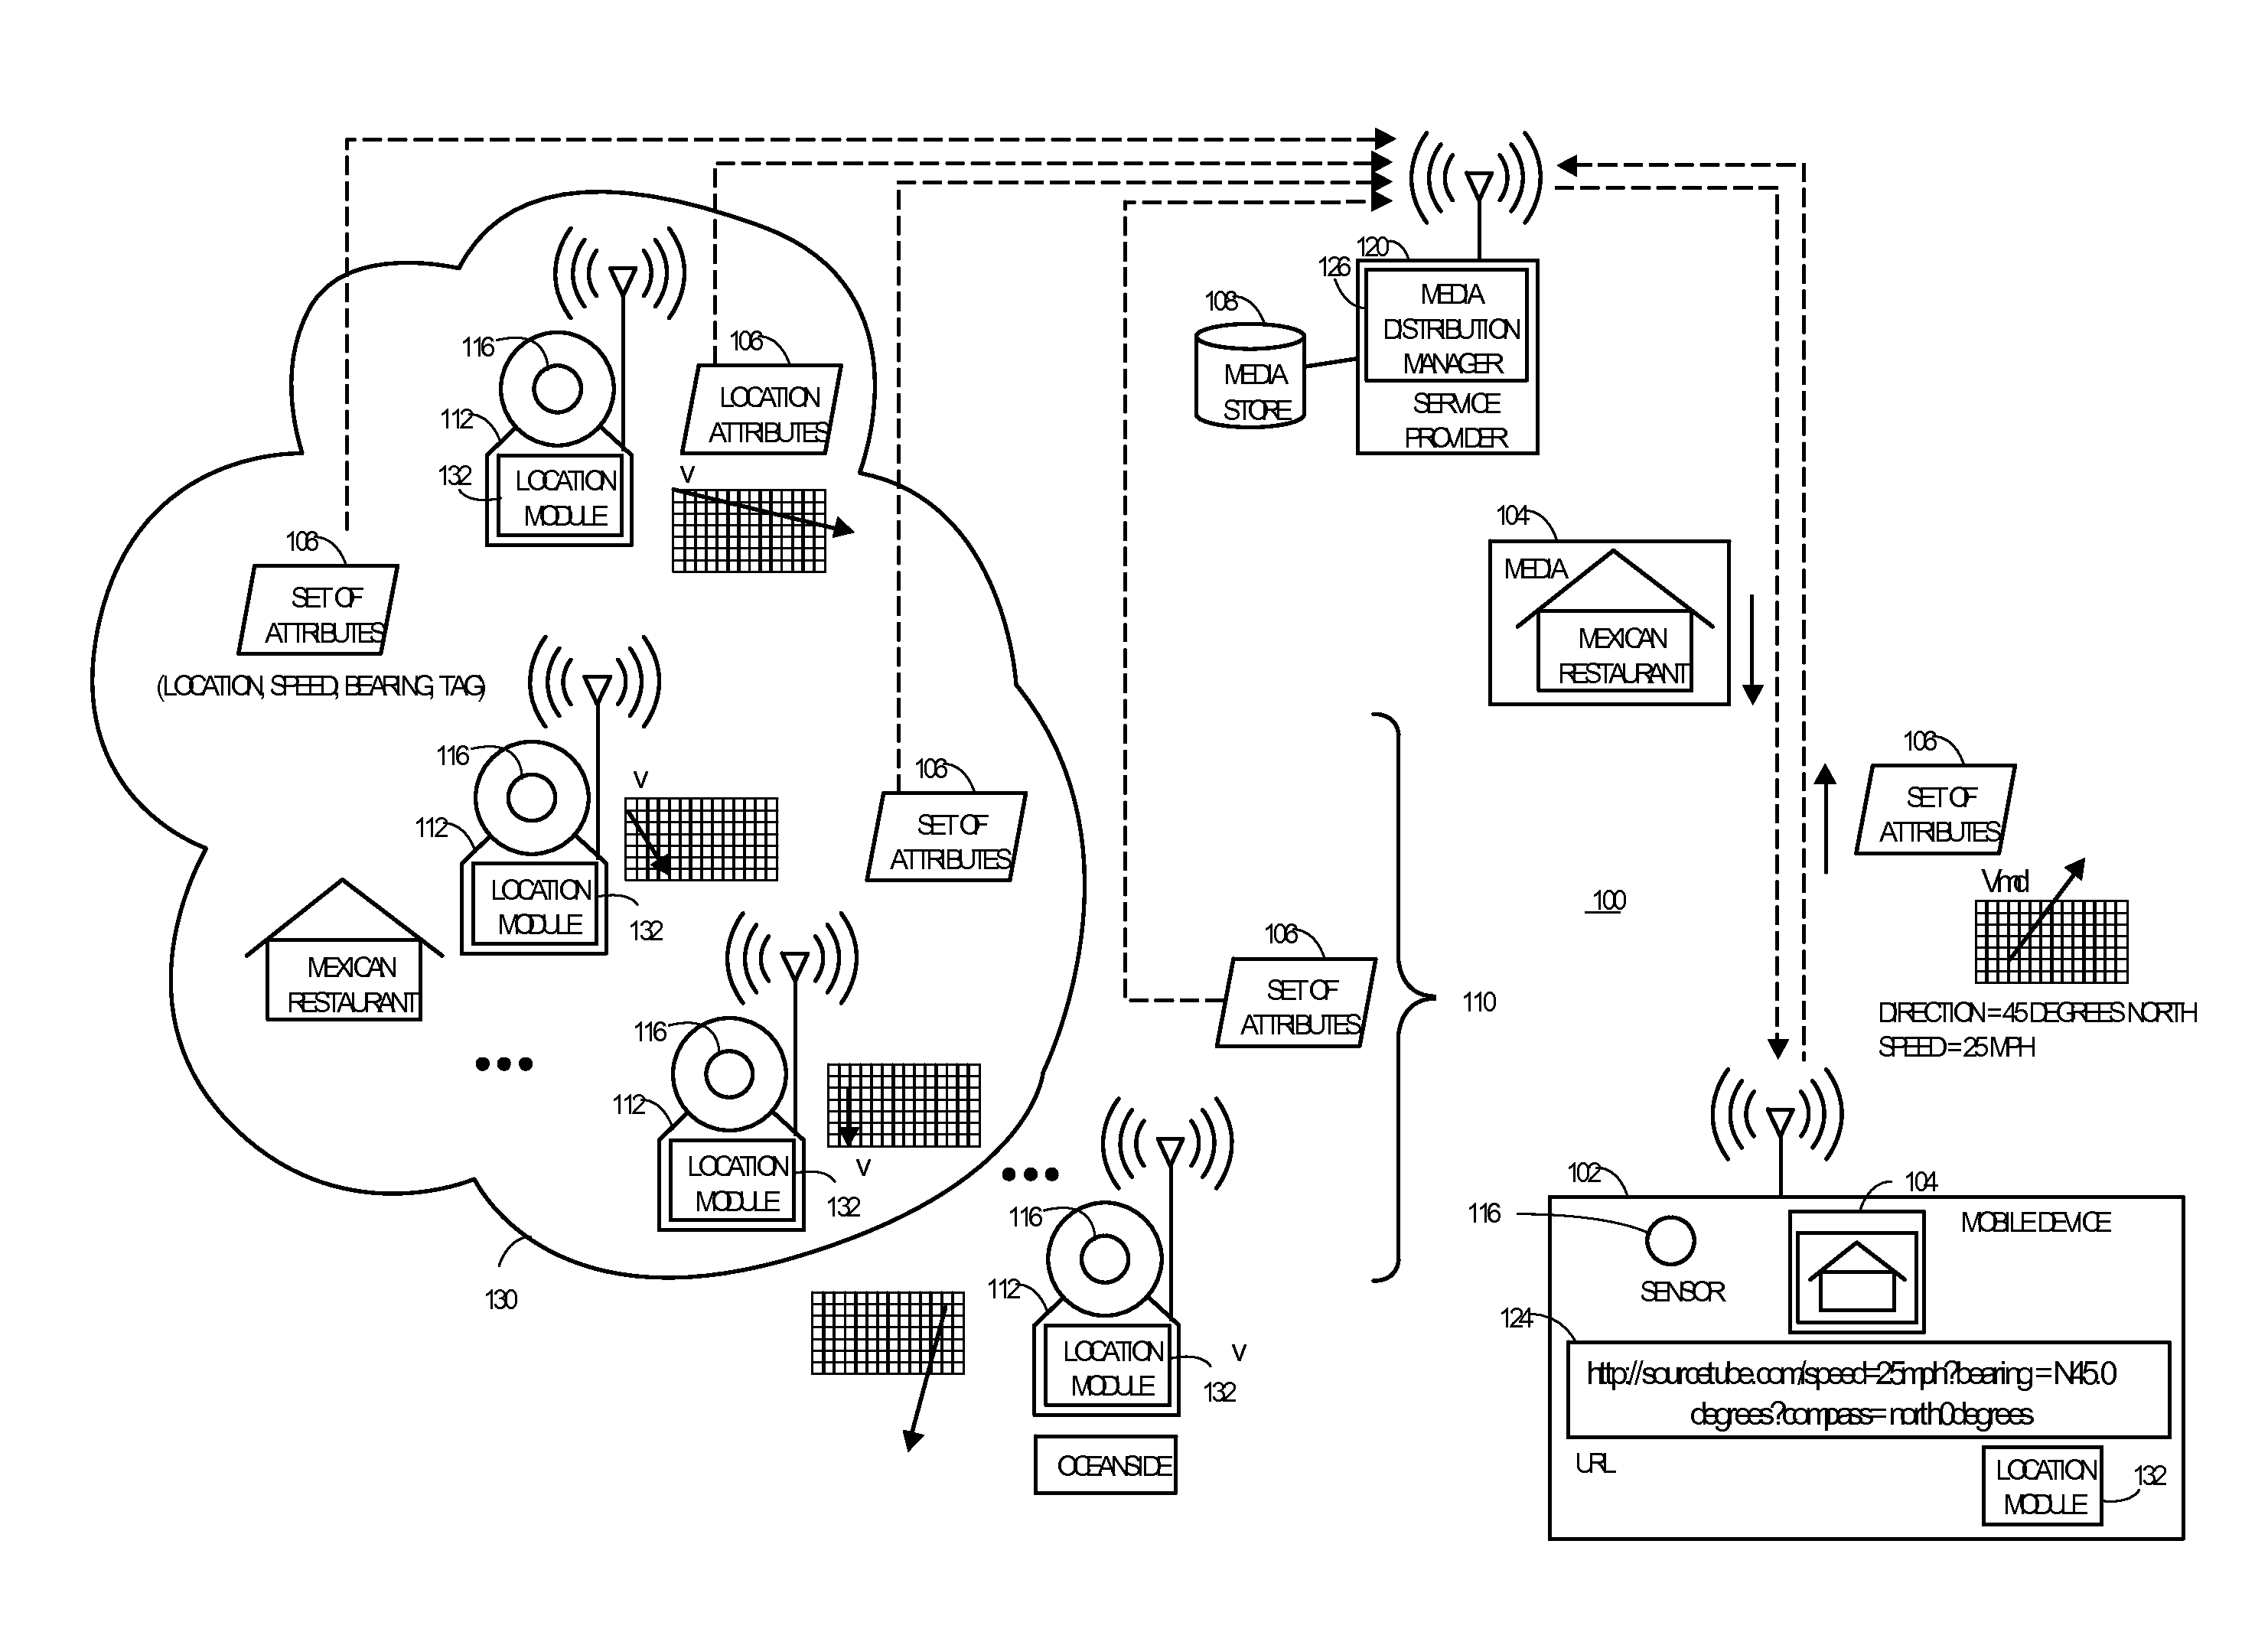 Systems and methods for generating a selective distribution of media content feeds